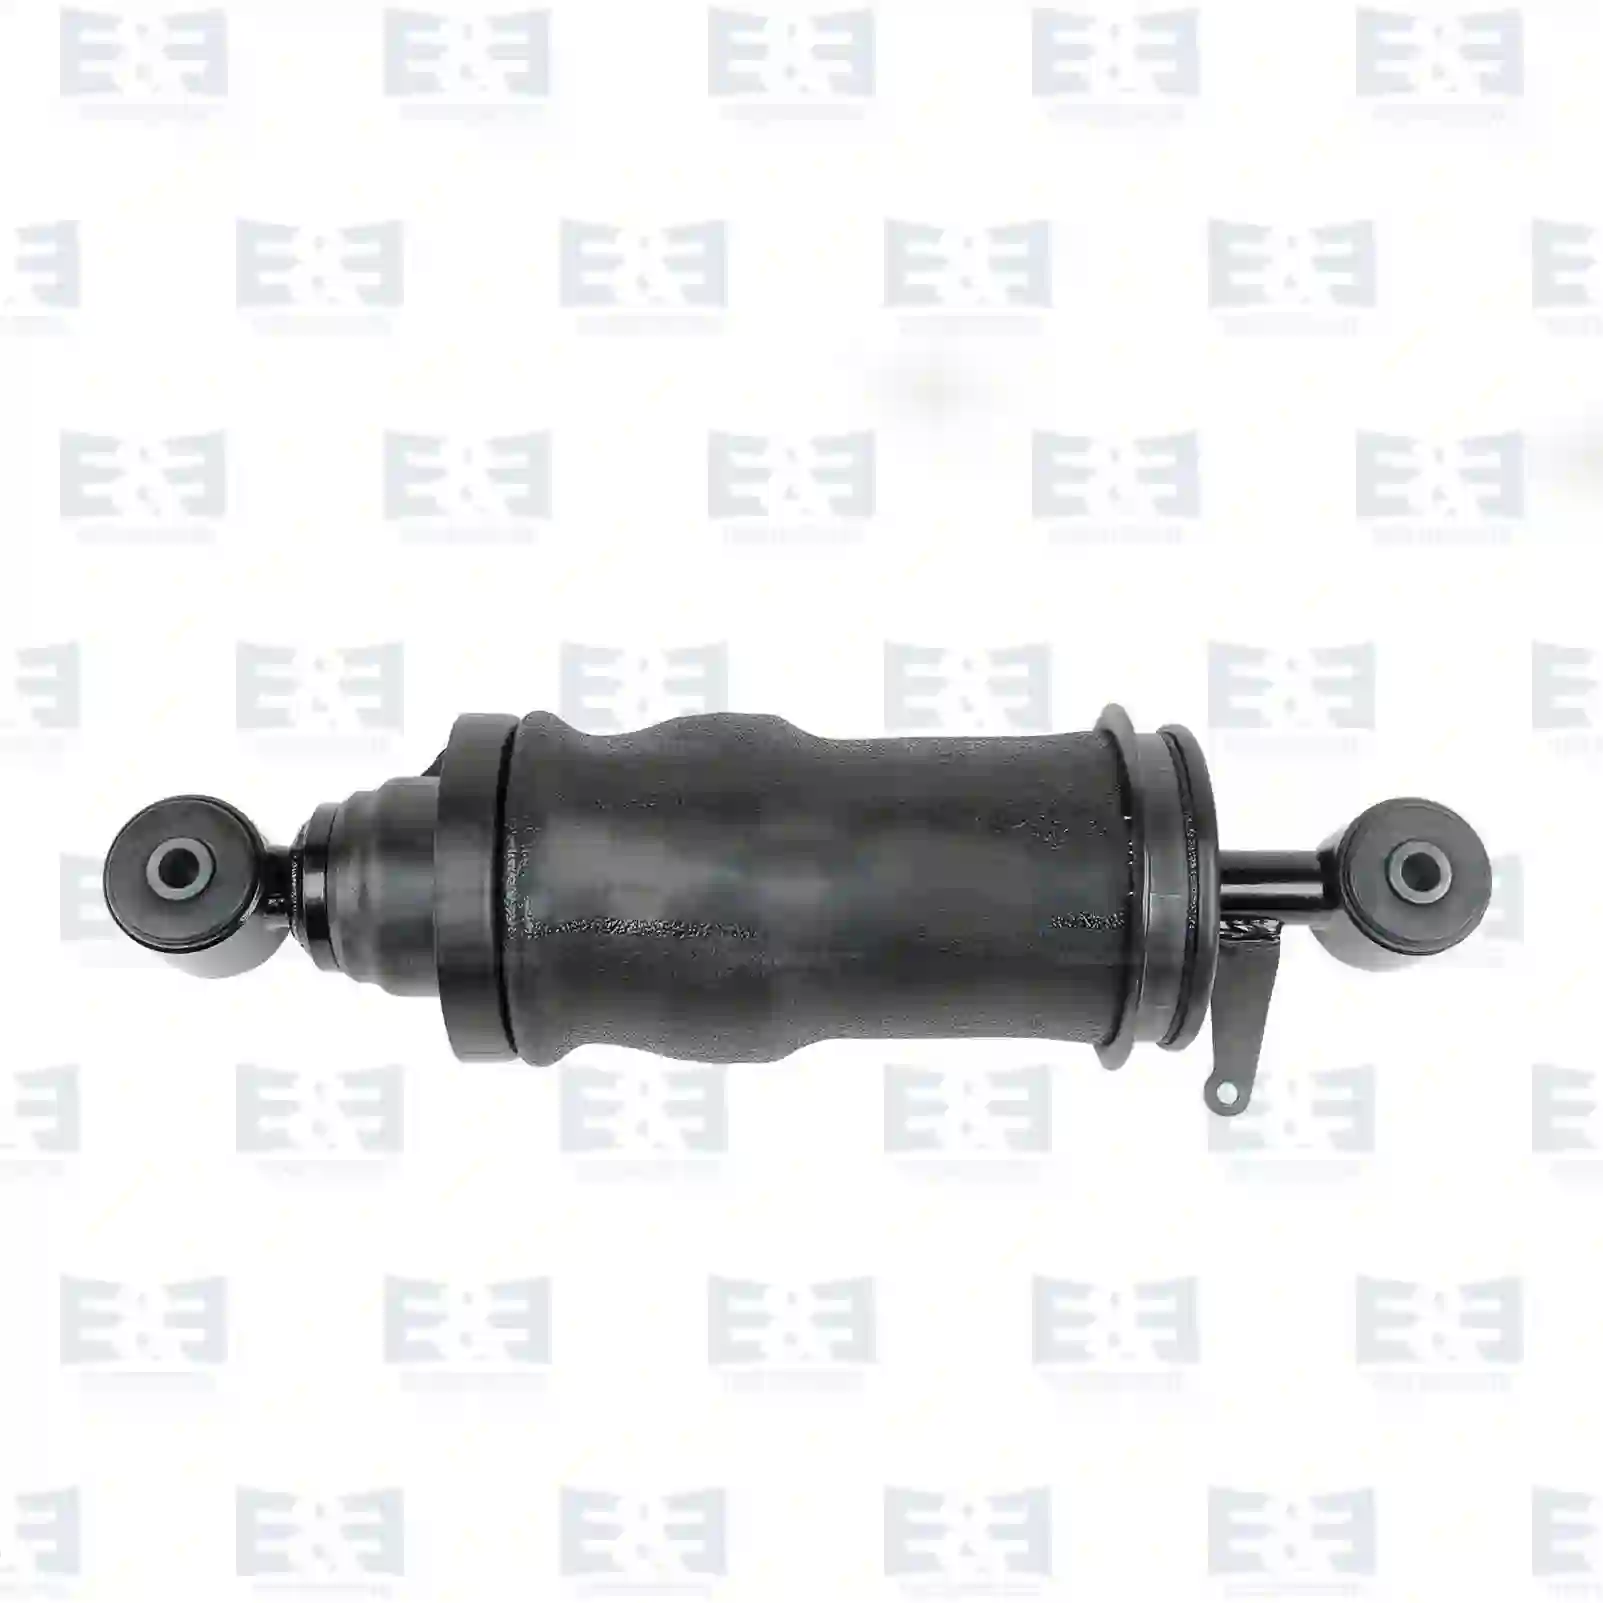 Cabin shock absorber, with air bellow, 2E2283586, 81417226077, 81417226078, 81417226092, 81417226093, 85417226008, 85417226009, 85417226014, 85417226015, 85417226022, 85417226023, 85417226014, 85417226015, 85417226022, 85417226023 ||  2E2283586 E&E Truck Spare Parts | Truck Spare Parts, Auotomotive Spare Parts Cabin shock absorber, with air bellow, 2E2283586, 81417226077, 81417226078, 81417226092, 81417226093, 85417226008, 85417226009, 85417226014, 85417226015, 85417226022, 85417226023, 85417226014, 85417226015, 85417226022, 85417226023 ||  2E2283586 E&E Truck Spare Parts | Truck Spare Parts, Auotomotive Spare Parts